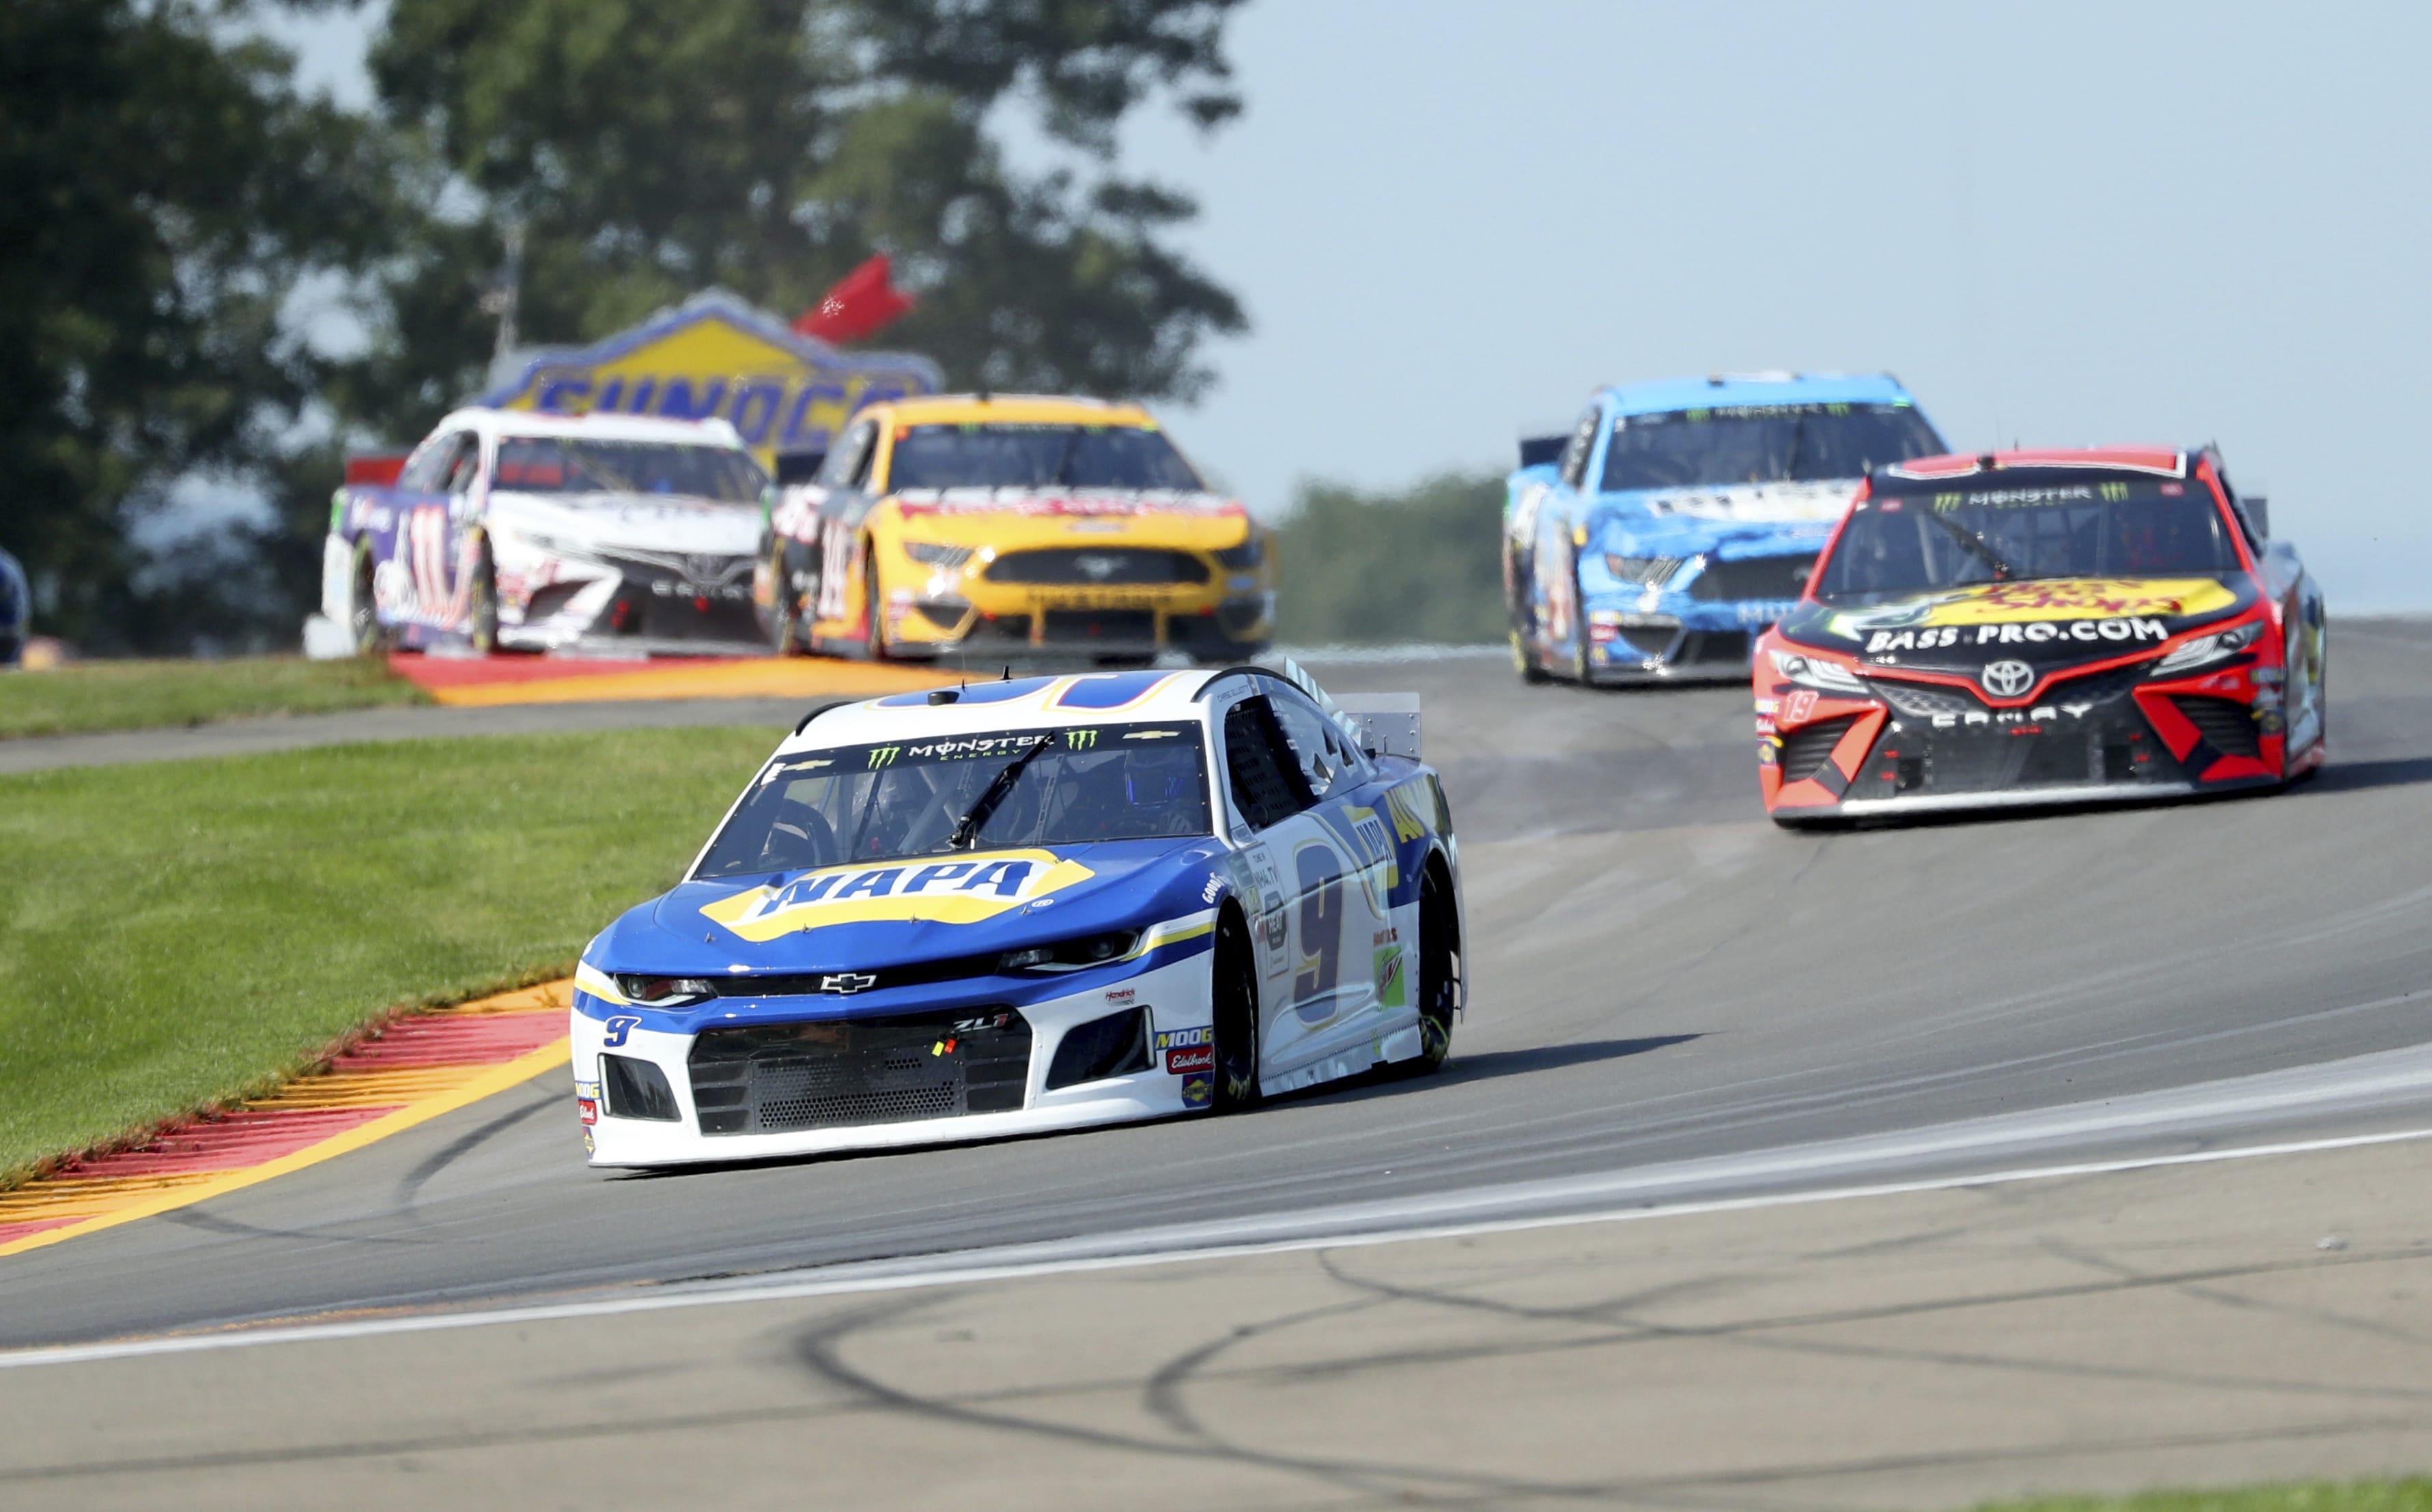 Chase Elliott leads the field thought the area known as "The Bus Stop" during a NASCAR Cup Series auto race at Watkins Glen International, Sunday, Aug. 4, 2019, in Watkins Glen, N.Y.